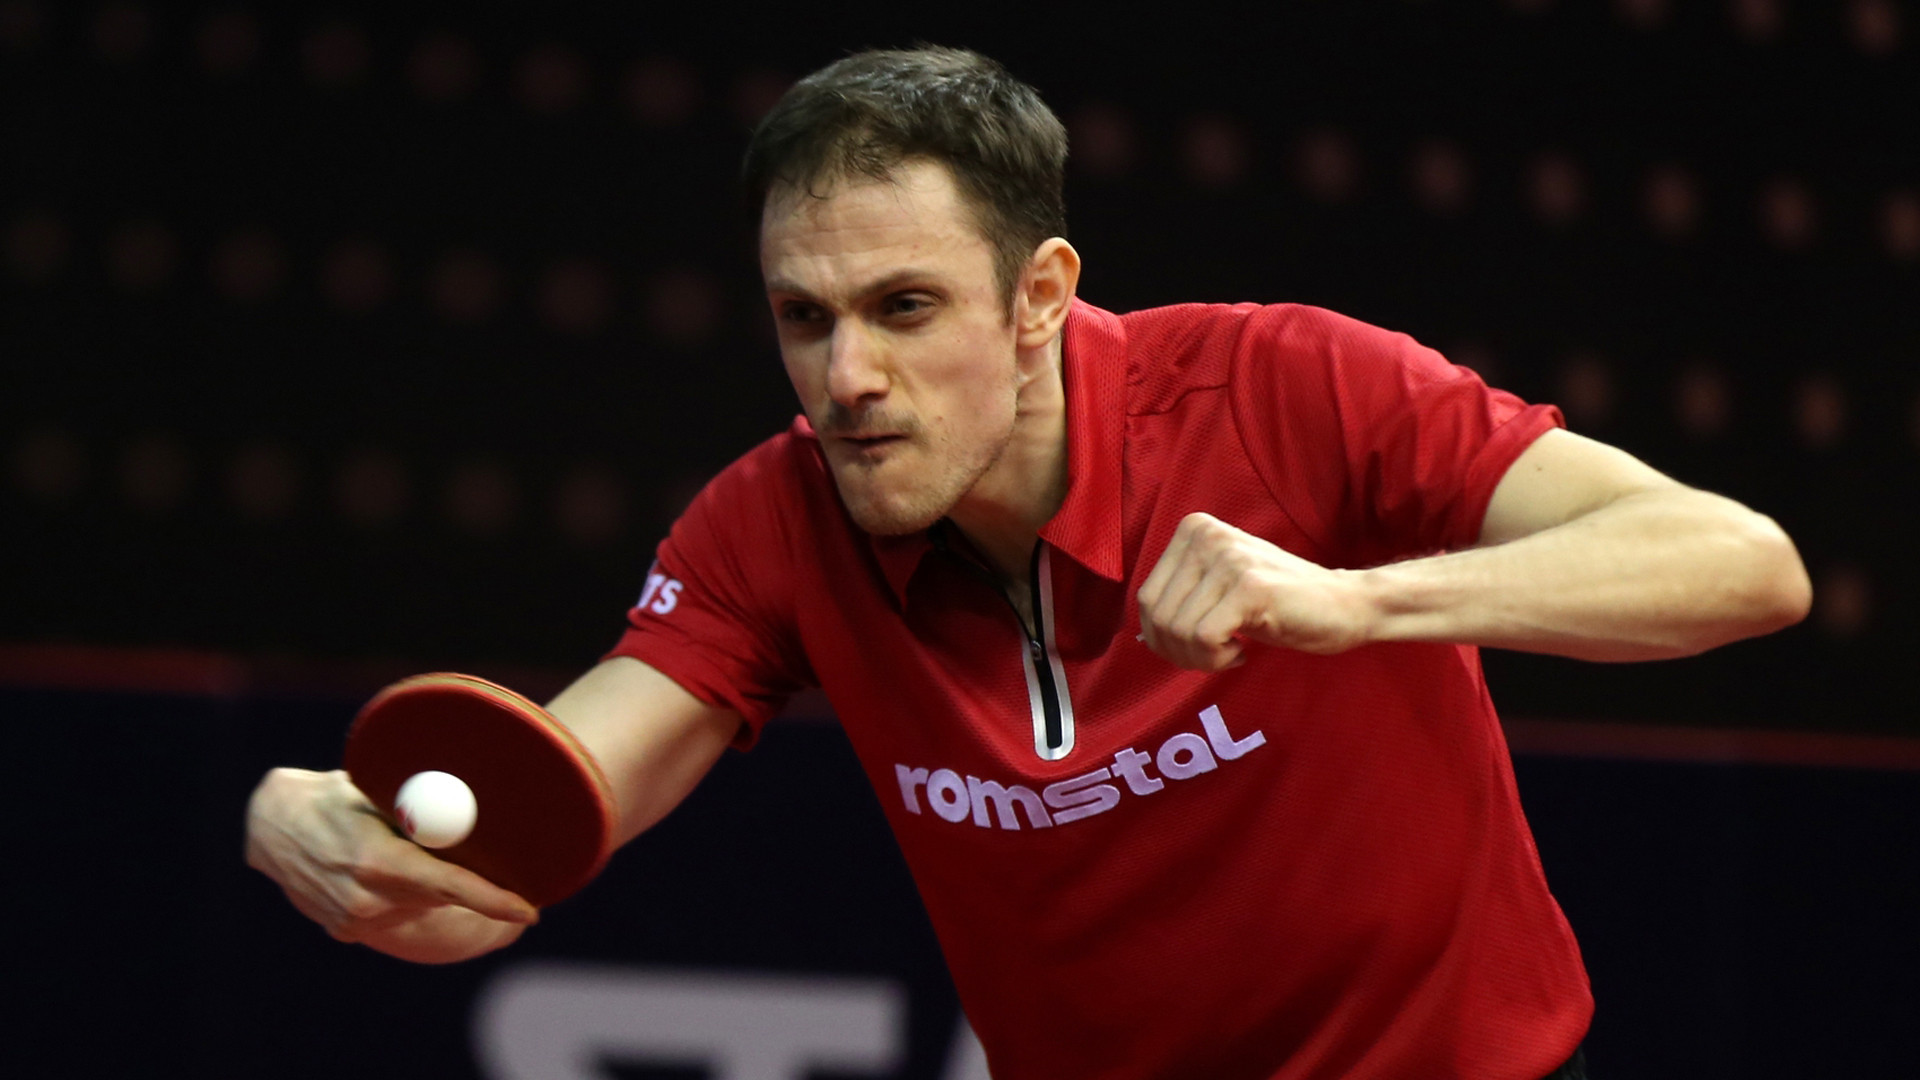 World silver medallists partners in defeat at ITTF European Olympic qualifier